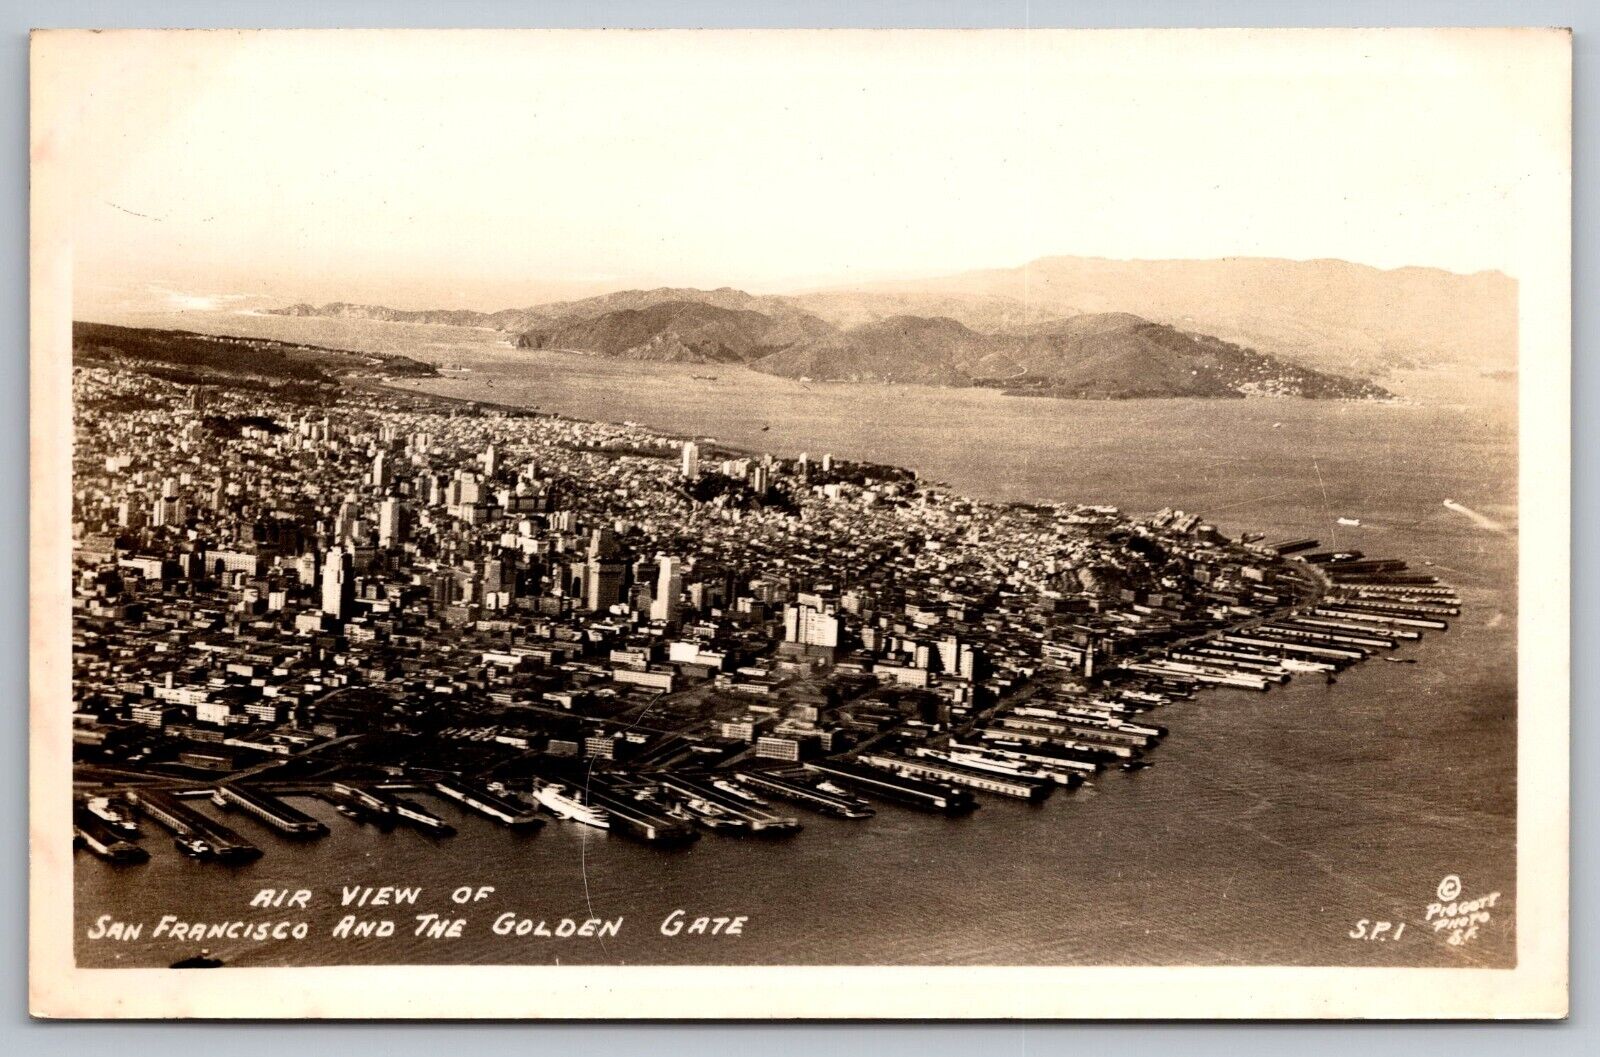 Air View of San Francisco and the Golden Gate. CA Real Photo Postcard RPPC